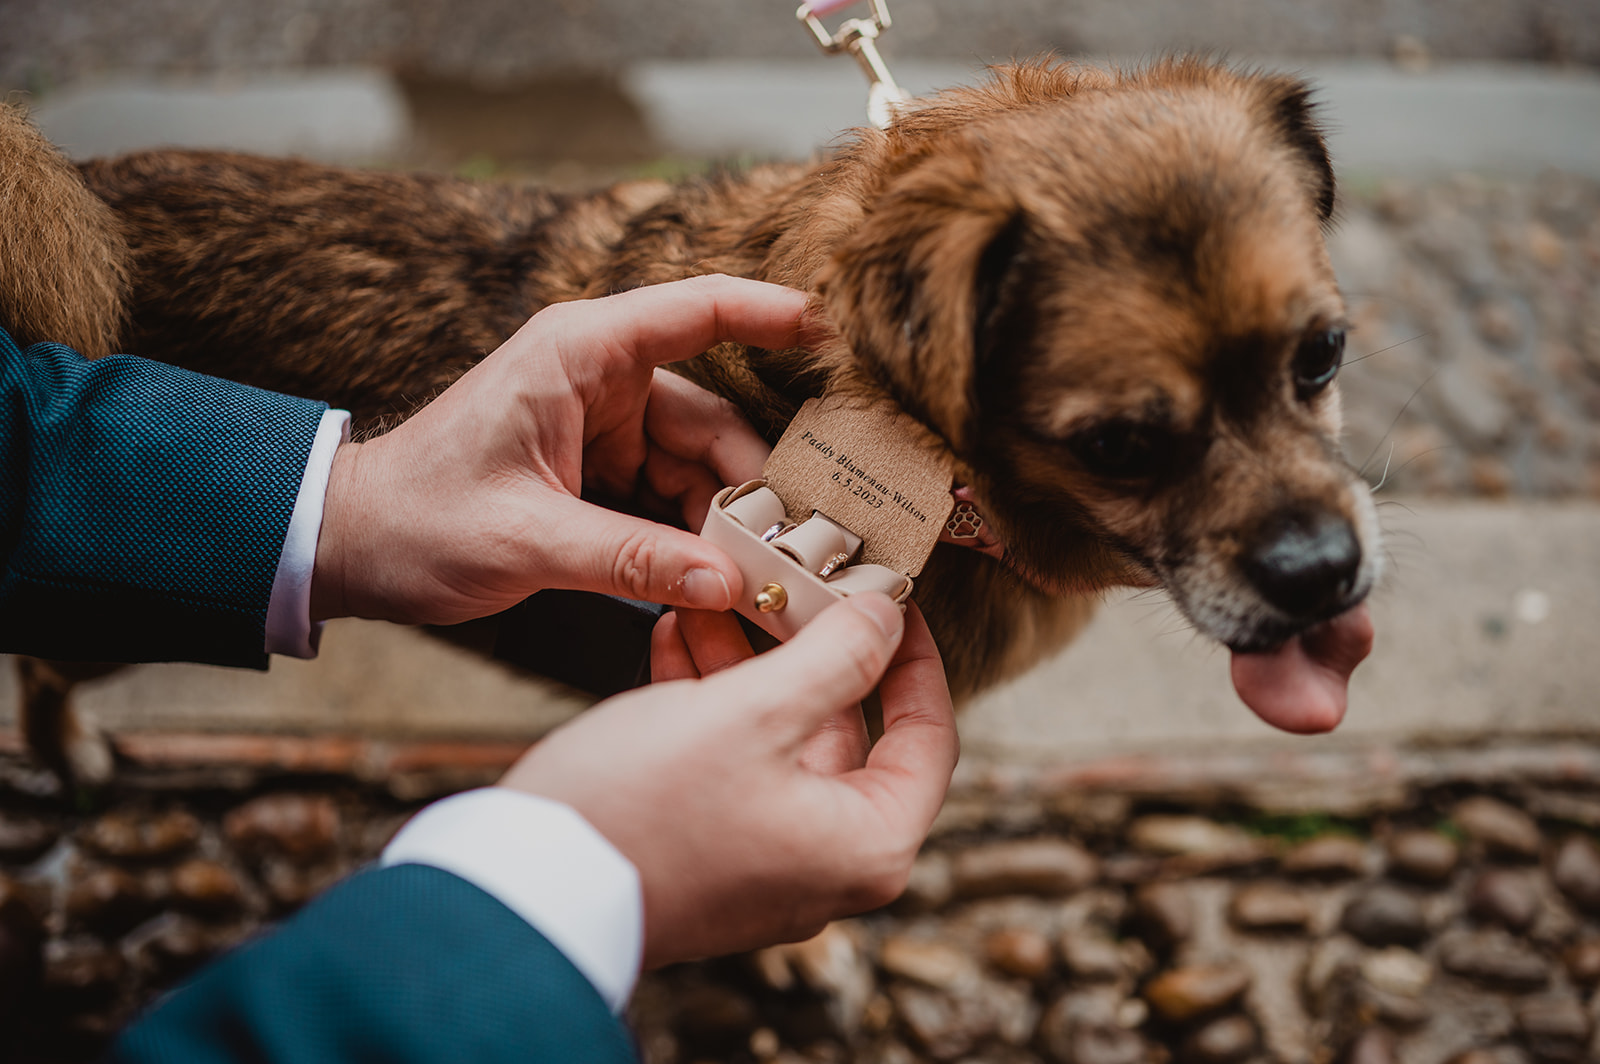 A pet dog is tasked with being a ring bearer at a wedding